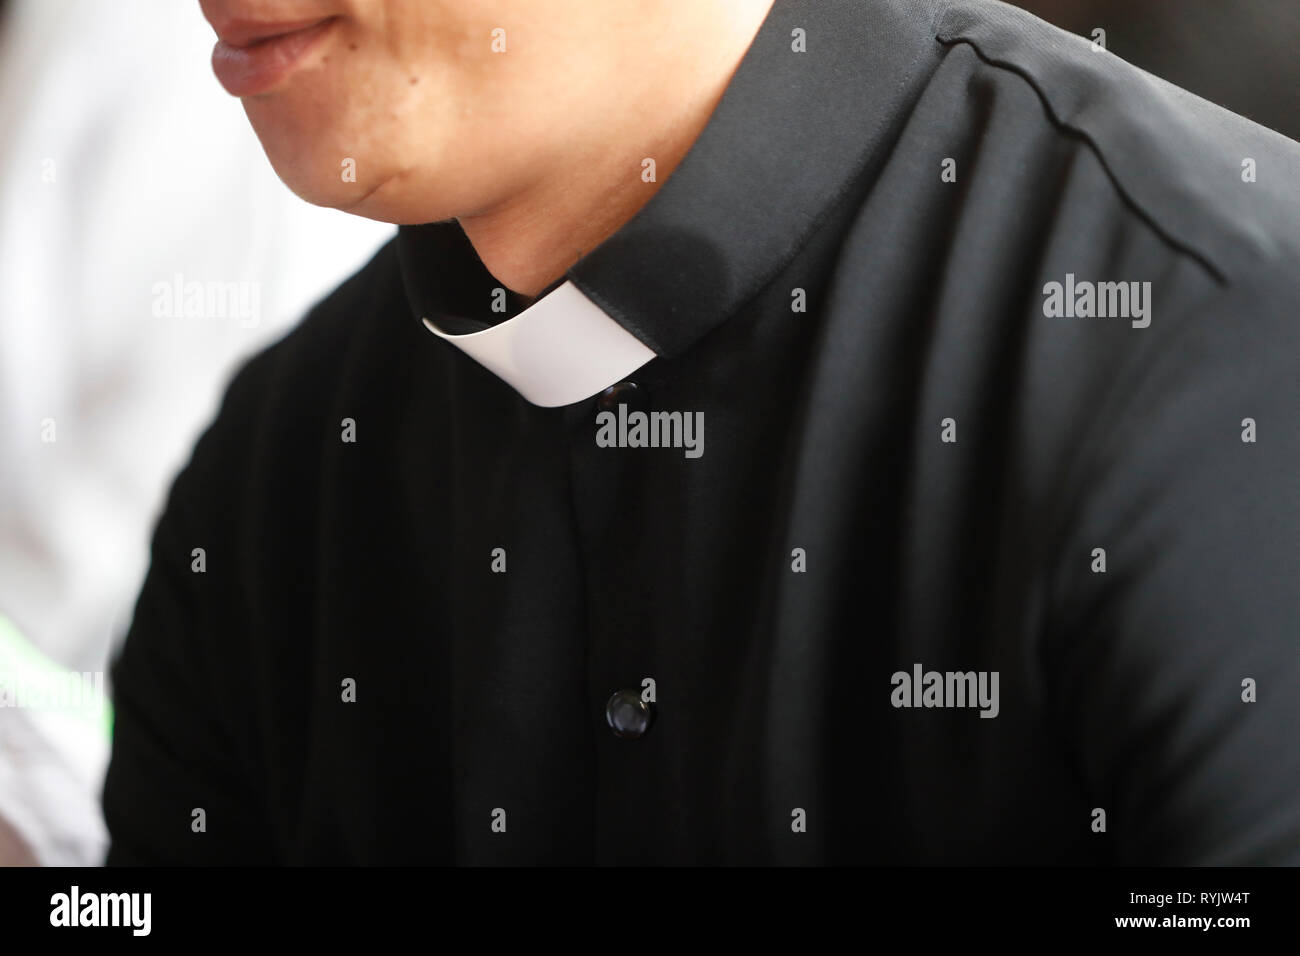 Priest wearing clerical shirt with a tab collar. Vietnam. Stock Photo